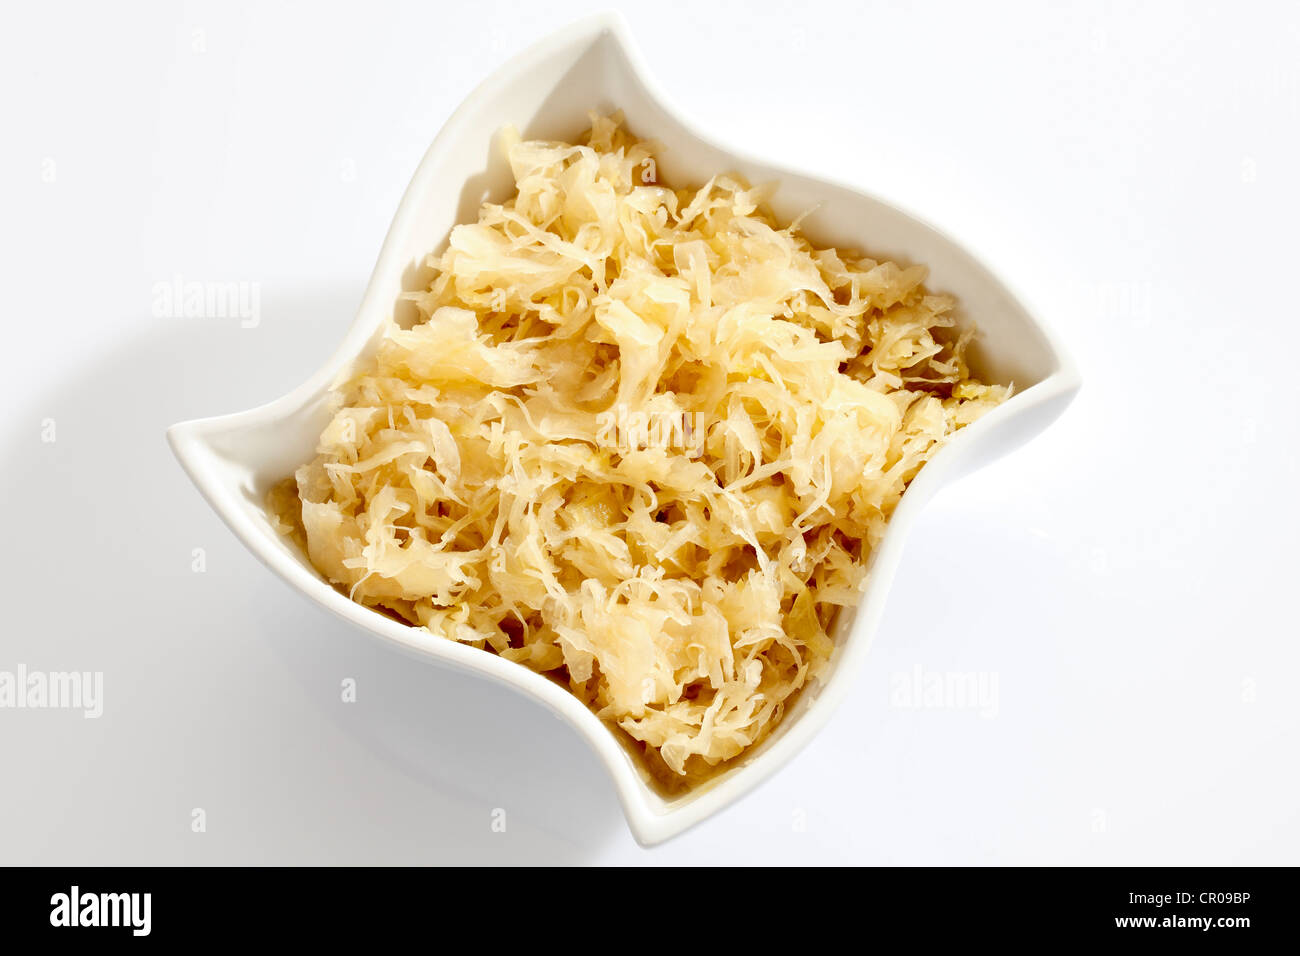 Sauerkraut from a can in a white porcelain bowl Stock Photo